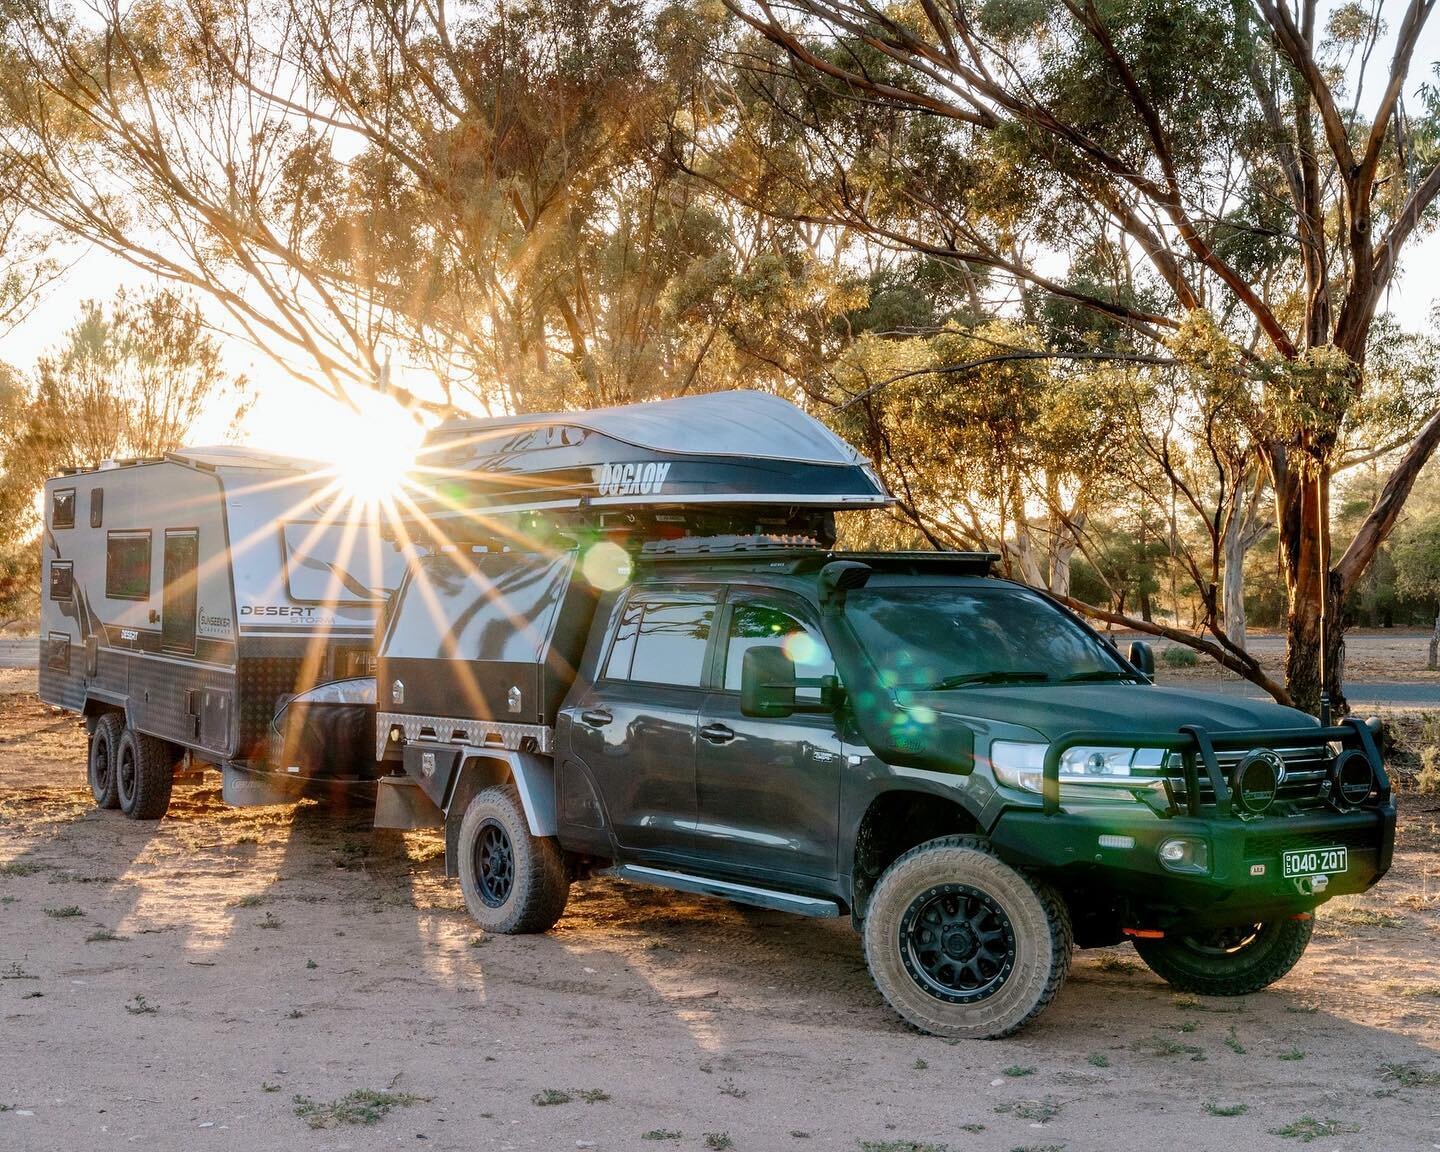 So we hear that you&rsquo;re all out there buying new caravans of late. Cause we&rsquo;ve been getting tonnes of set up messages about Anderson plugs, suspension, storage, off-grid gear etc etc.
So, fire away below with your questions?
P. S killer sunrise over the van.